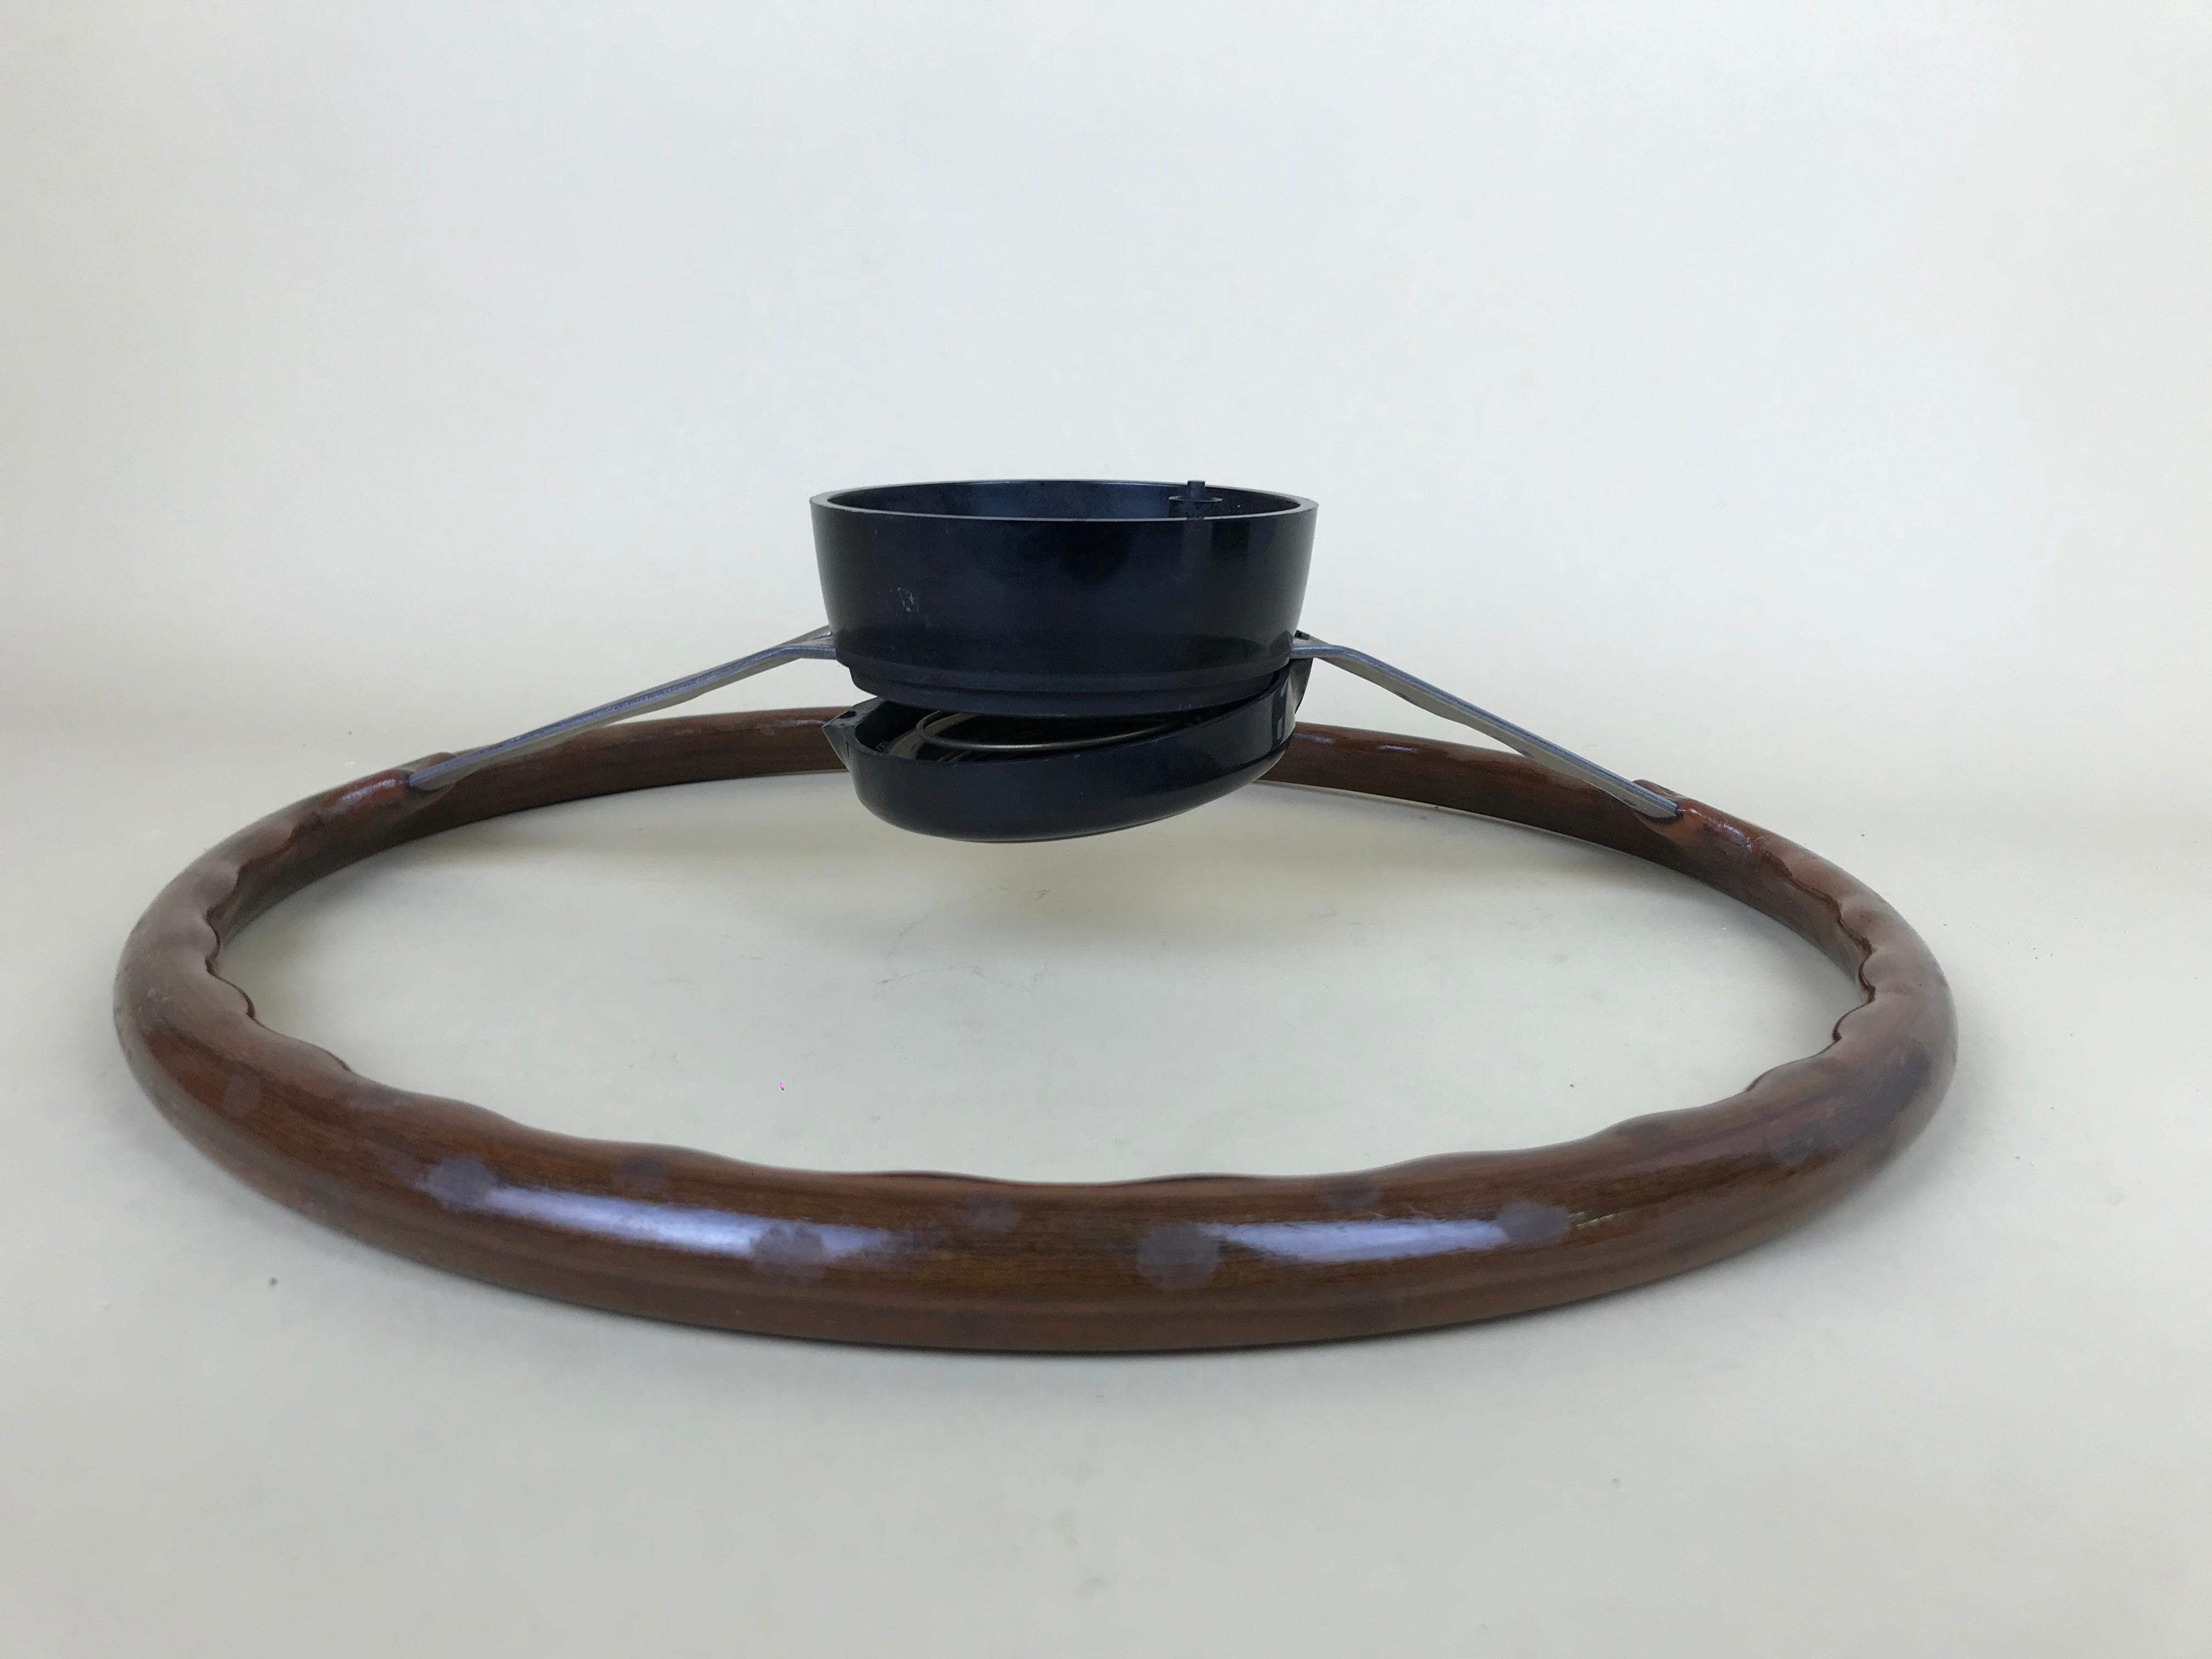 1960s Vintage Wooden and Metal Lancia Steering Wheel Made in Italy For Sale 9